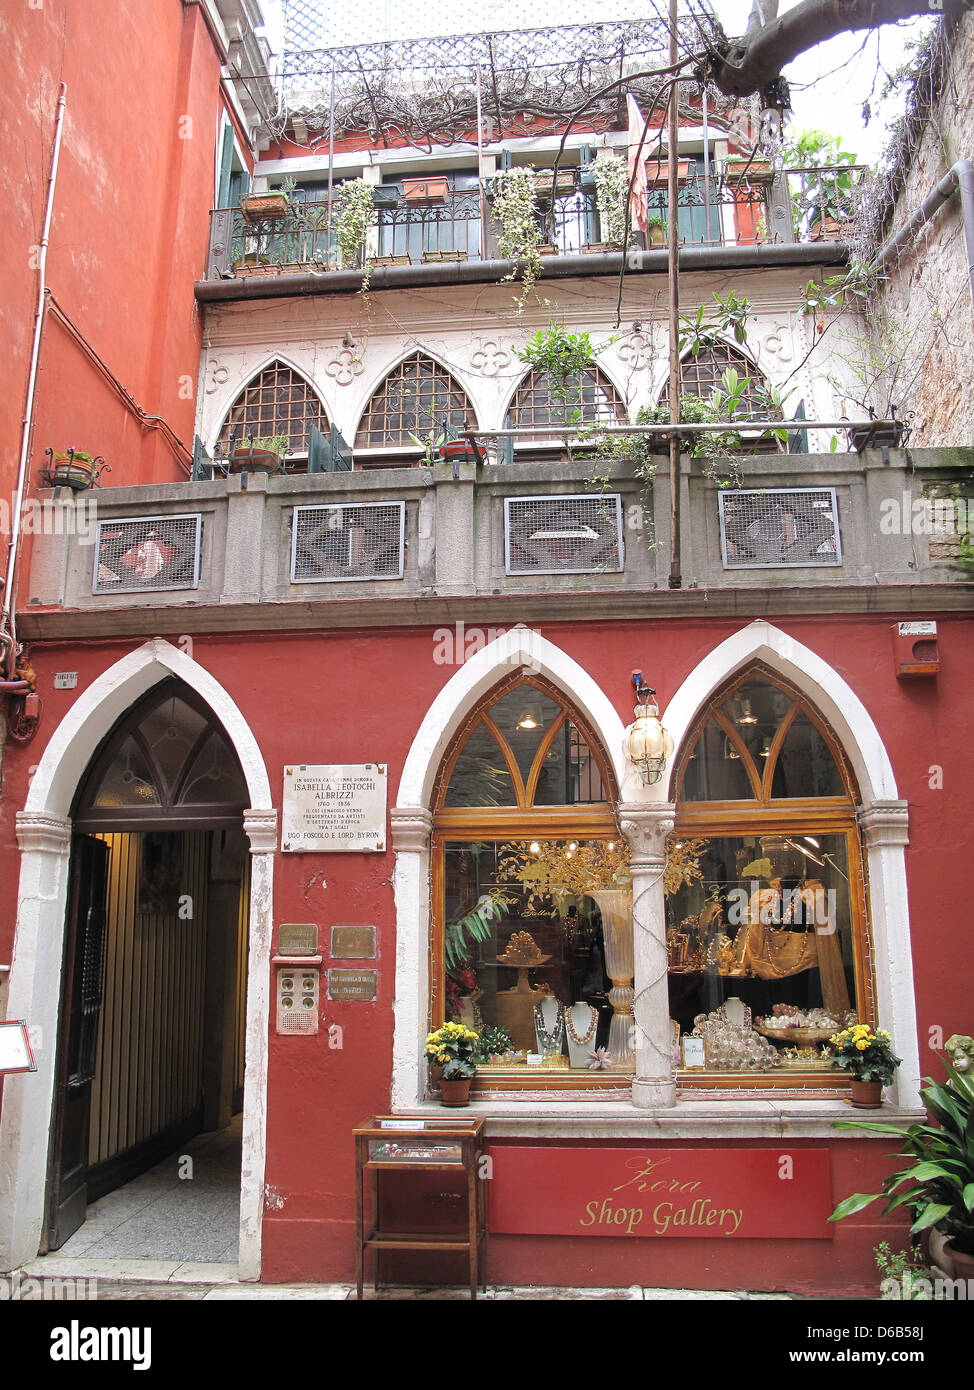 Venetian boutique and former home of Lord Byron in Venice Stock Photo